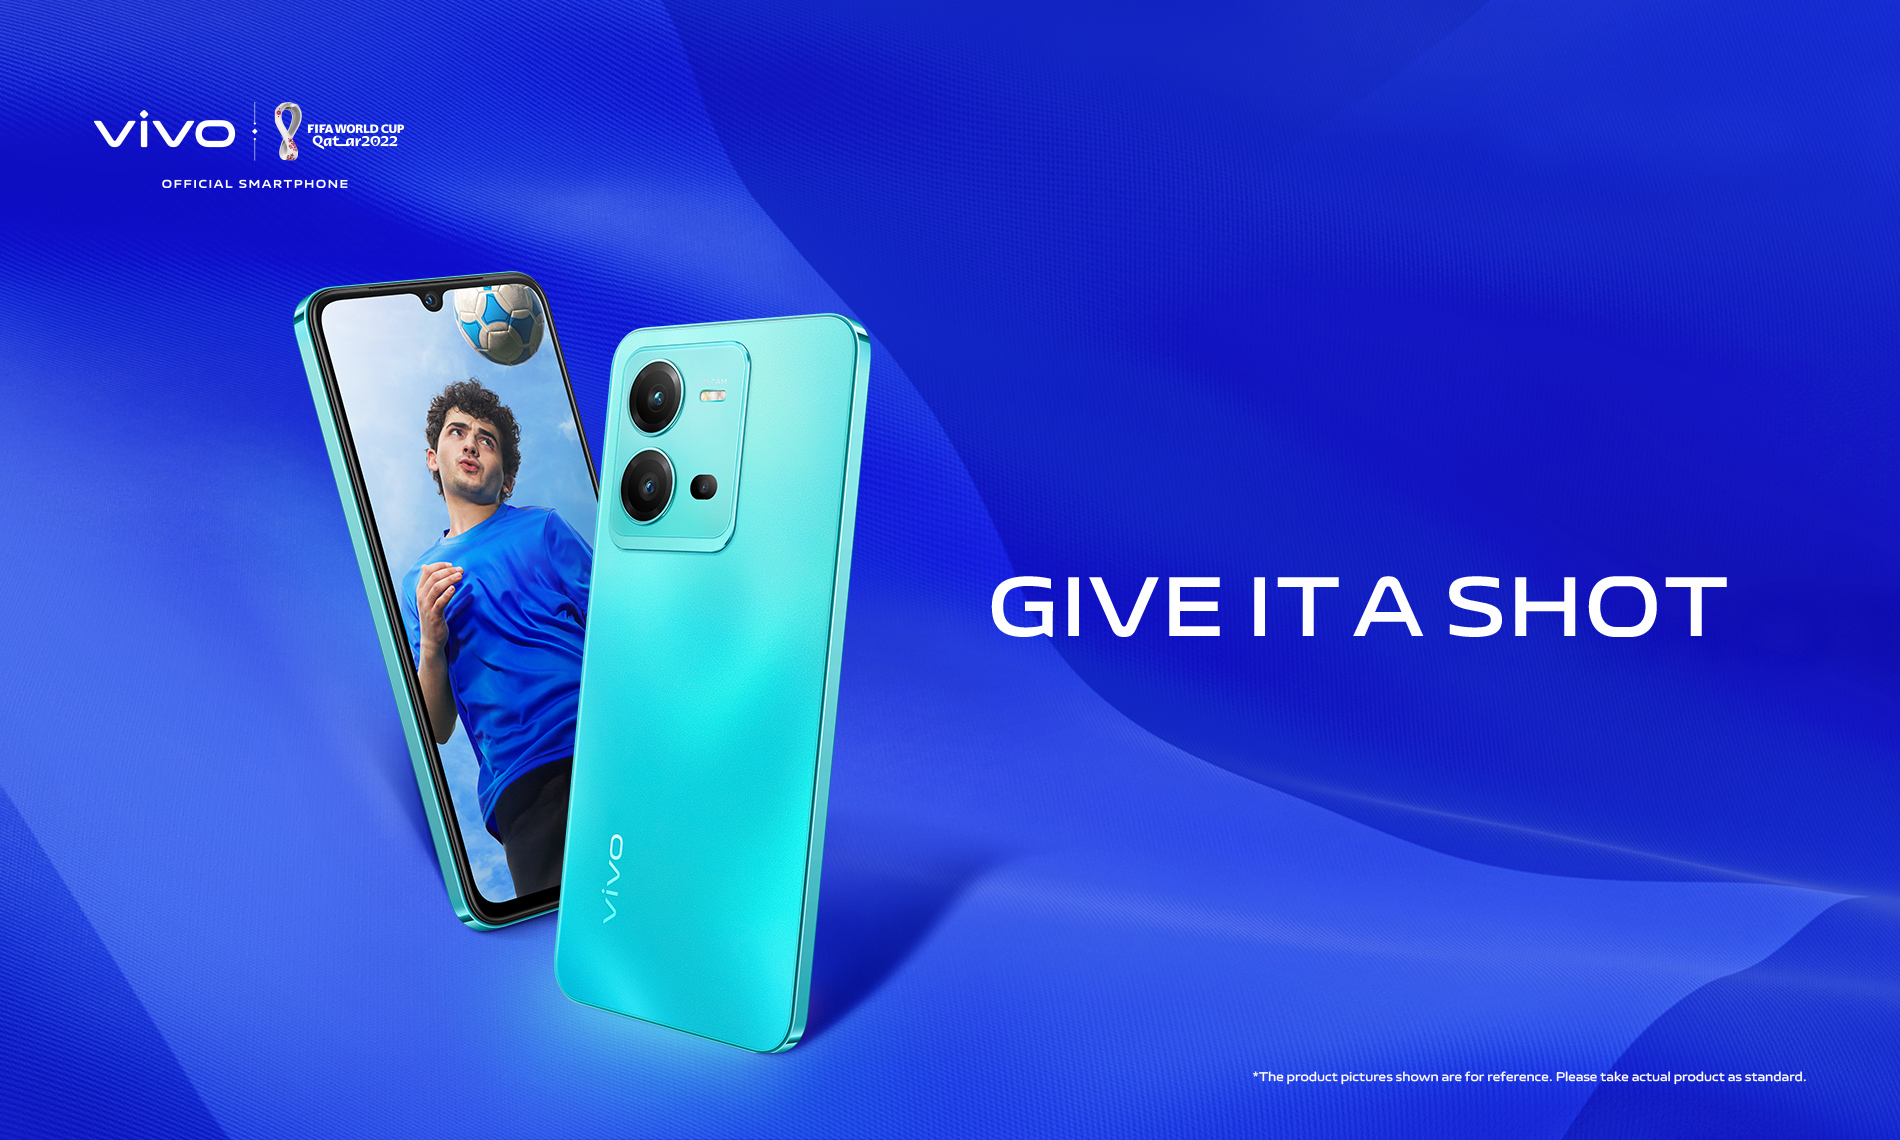 This FIFA Season, Unleash Your Creativity and Win Exclusive Gifts with vivo's 'Give It a Shot' Campaign